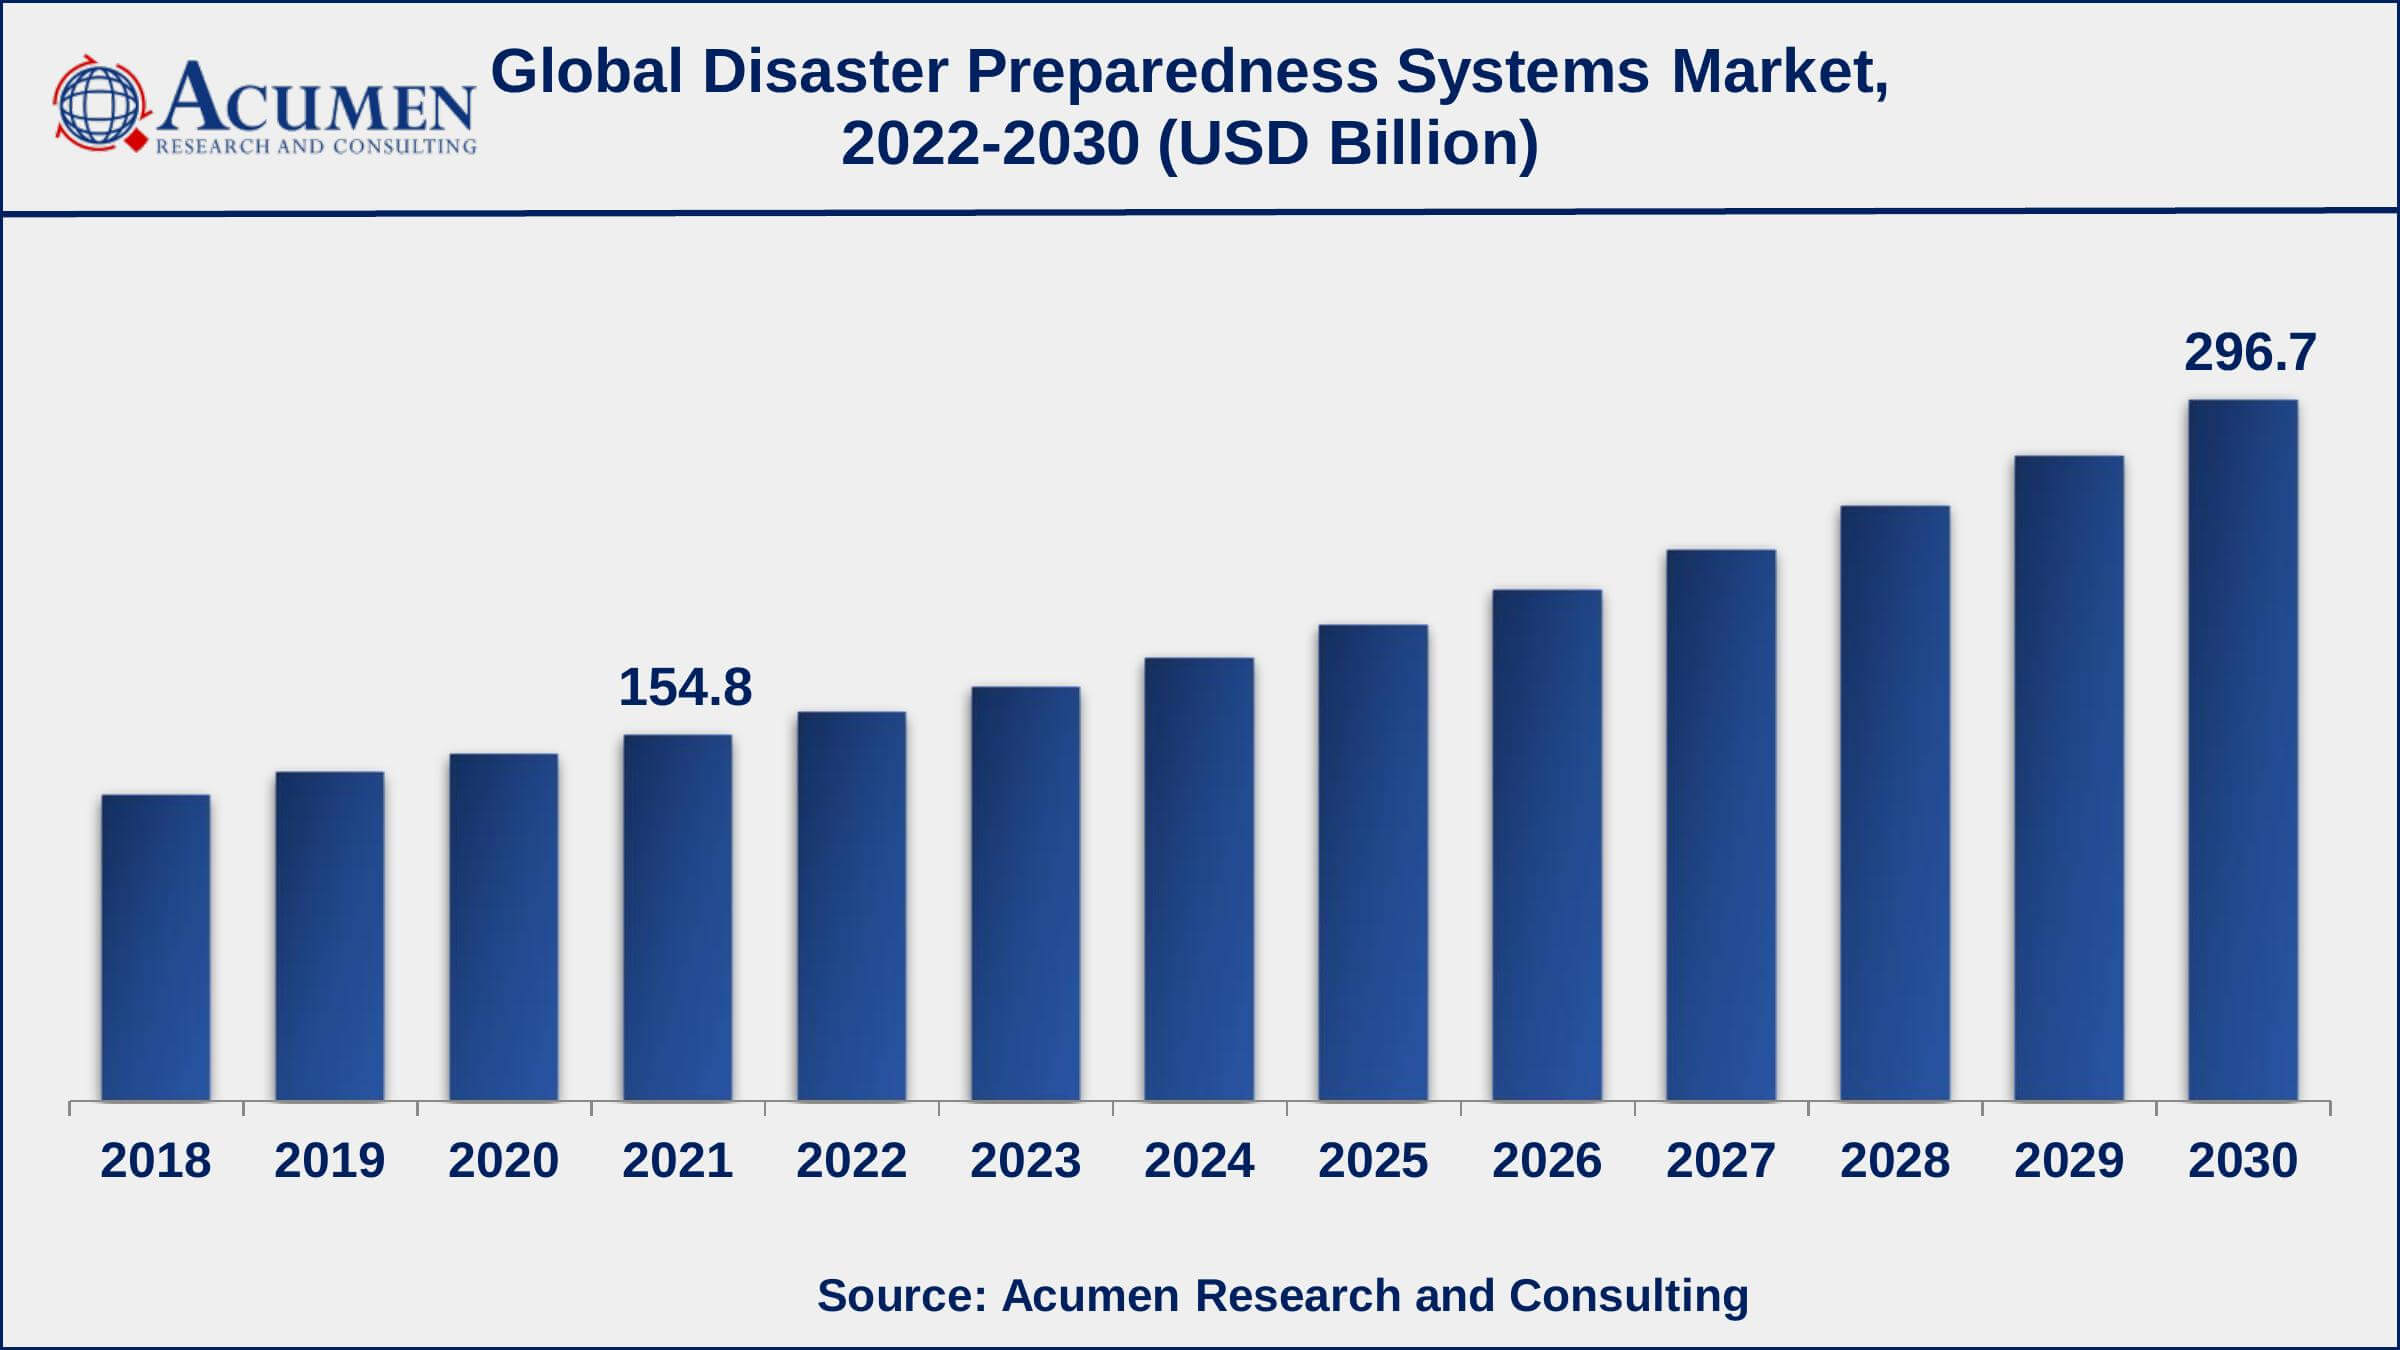 Asia-Pacific disaster preparedness systems market growth will record a CAGR of more than 8% from 2022 to 2030